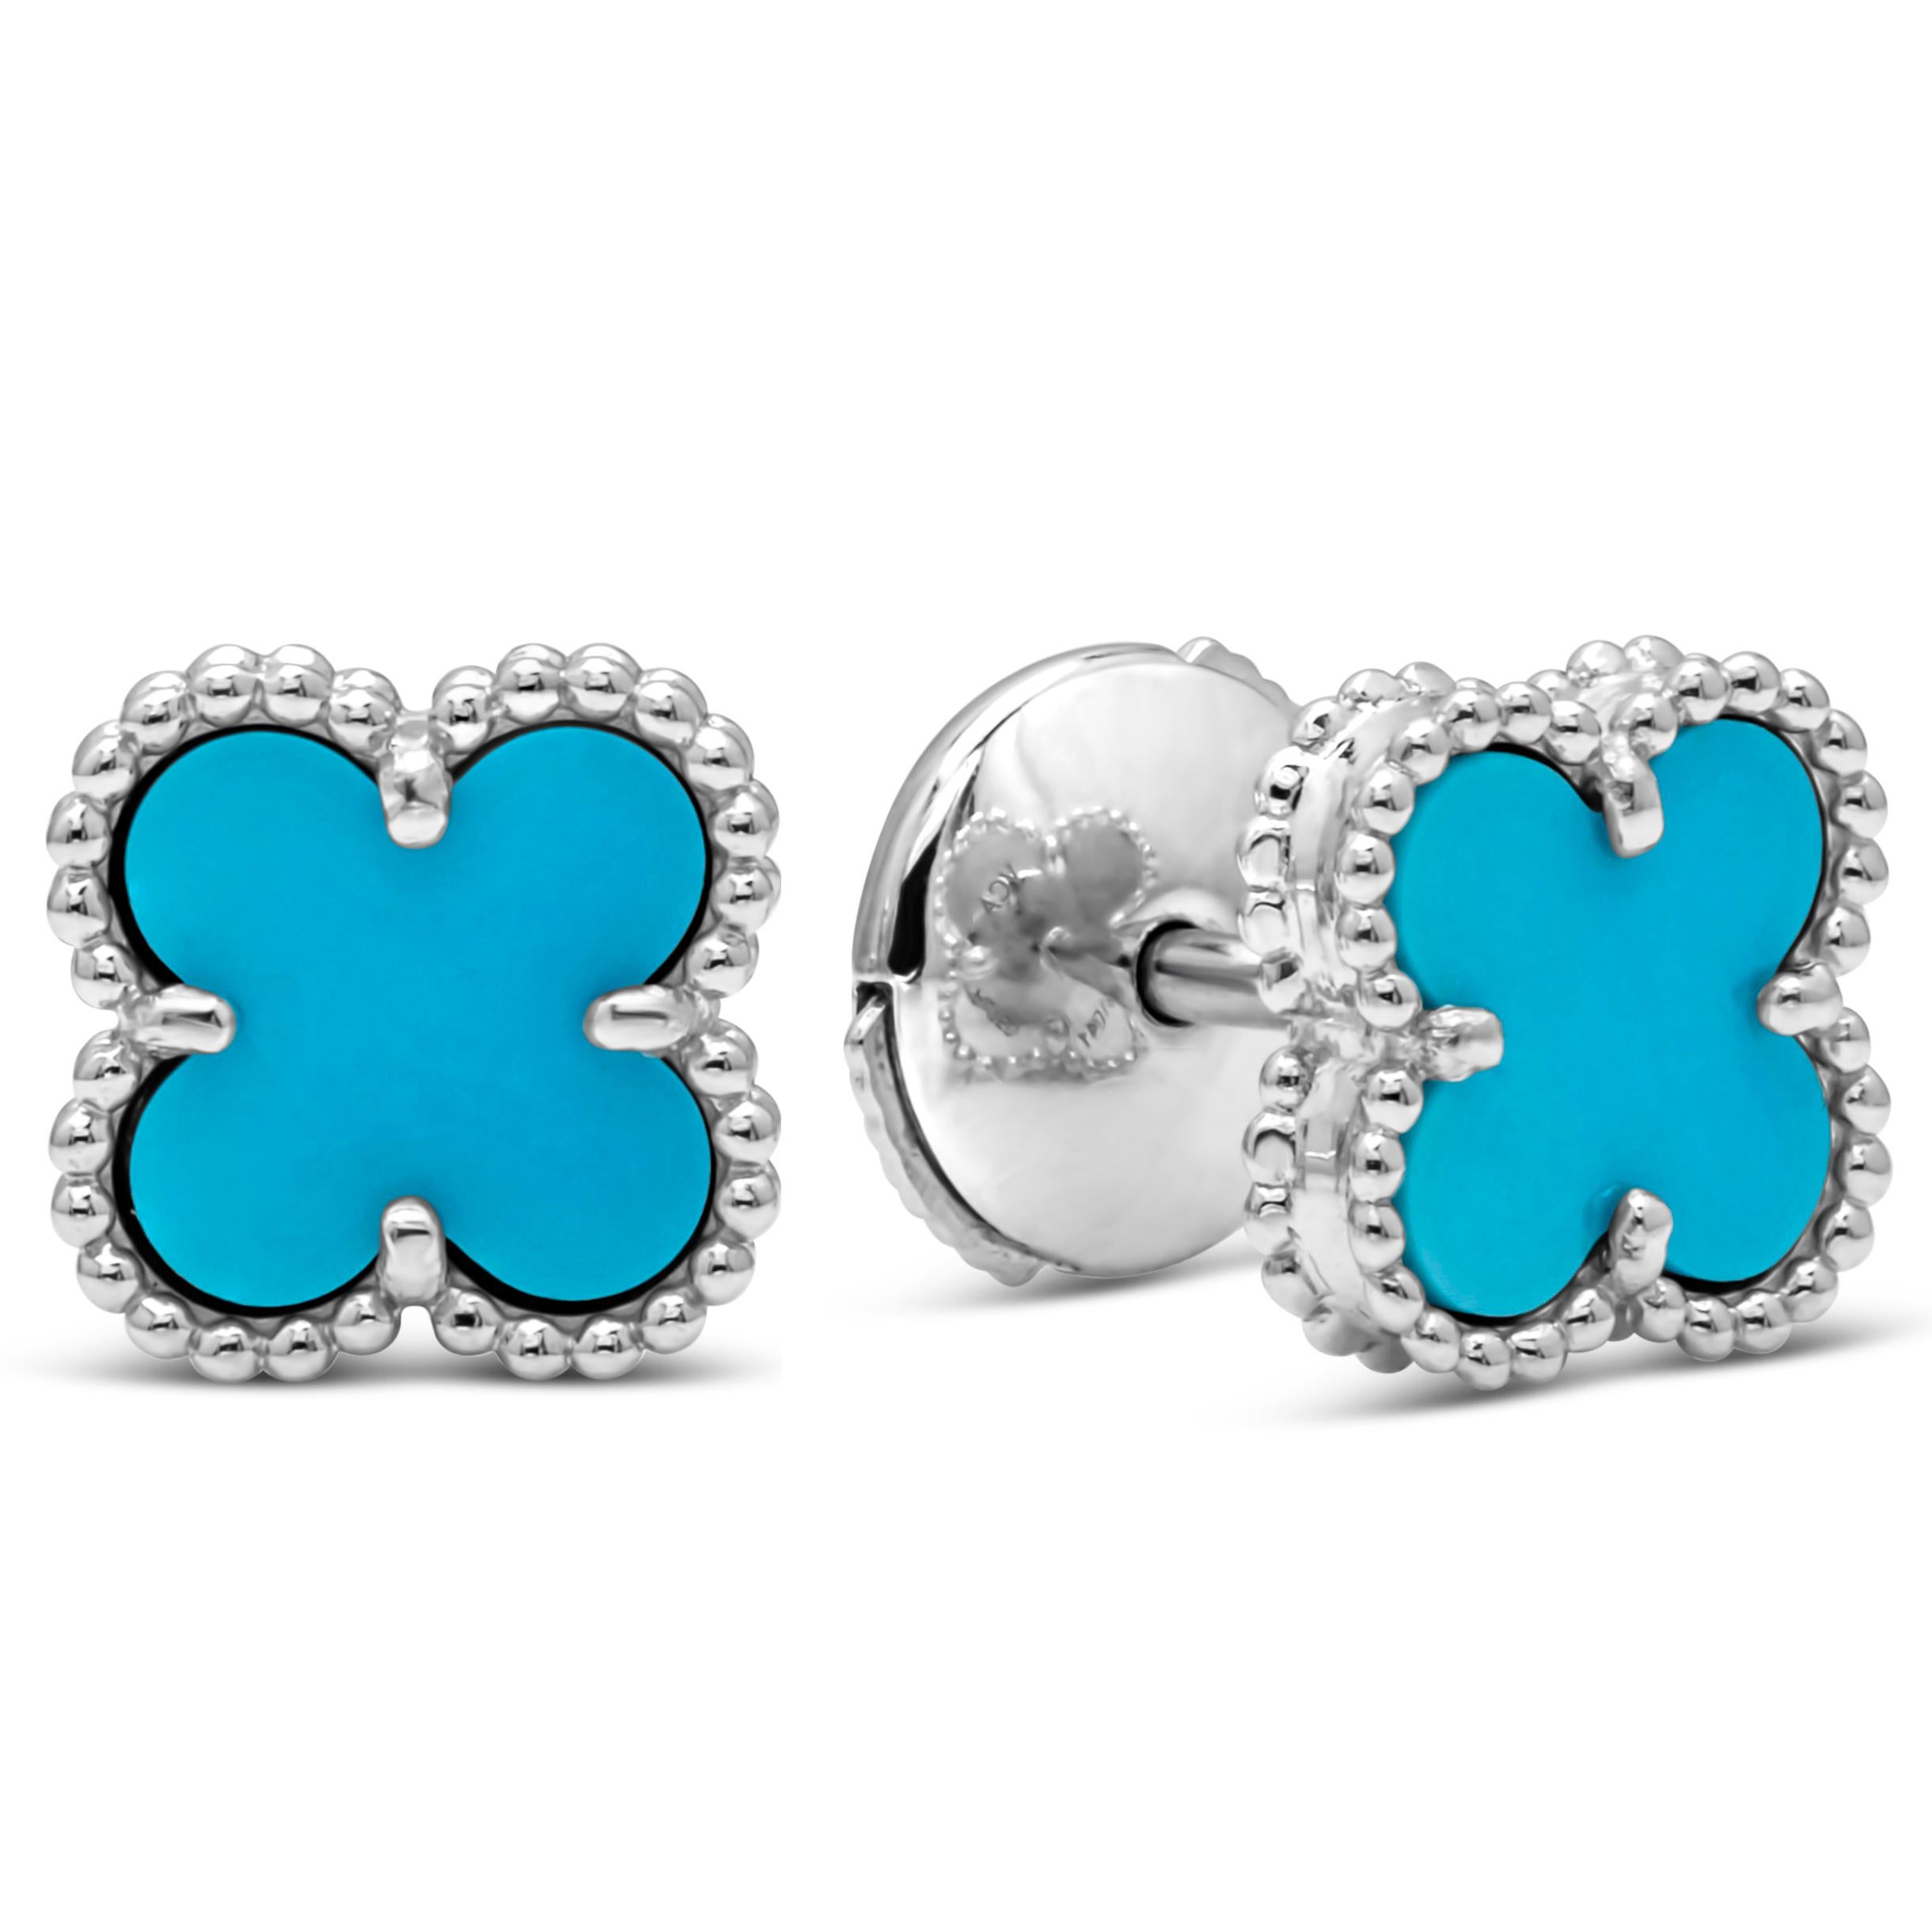 A classic pair of sweet stud earrings created by Van Cleef & Arpels for the Alhambra collection, featuring unique turquoise clovers set on a four prong 18K white gold.

Comes with original box.